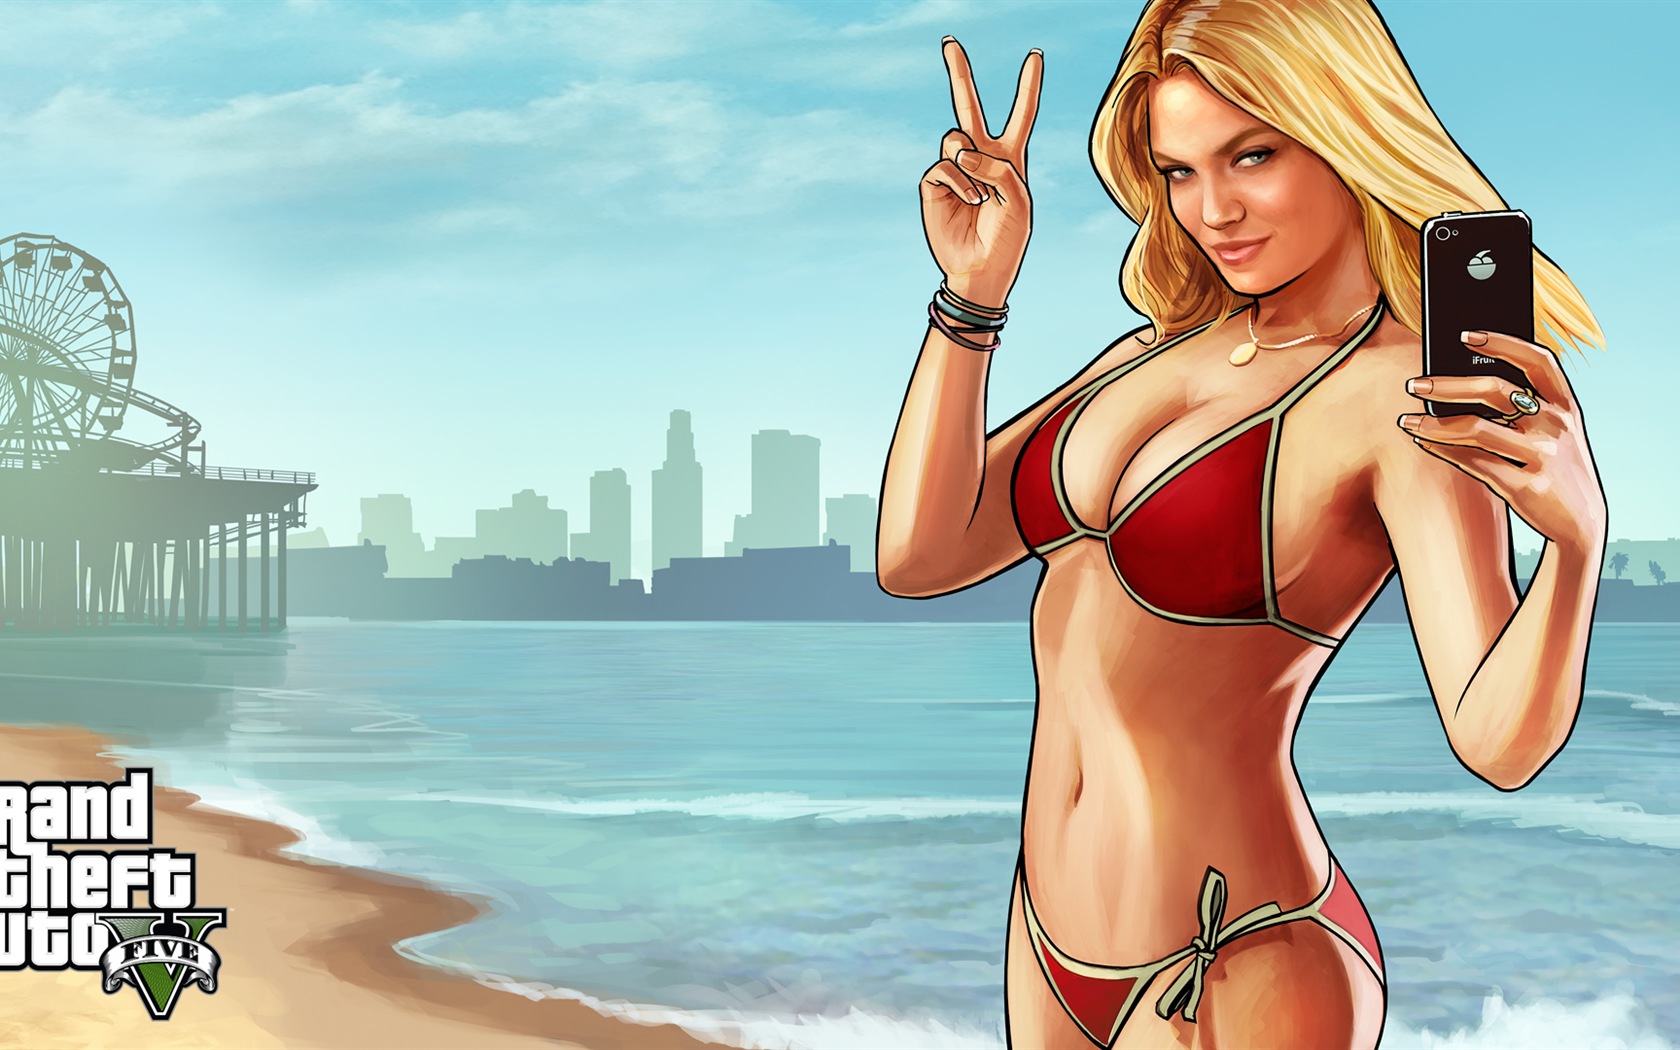 Grand Theft Auto V GTA 5 HD game wallpapers #13 - 1680x1050